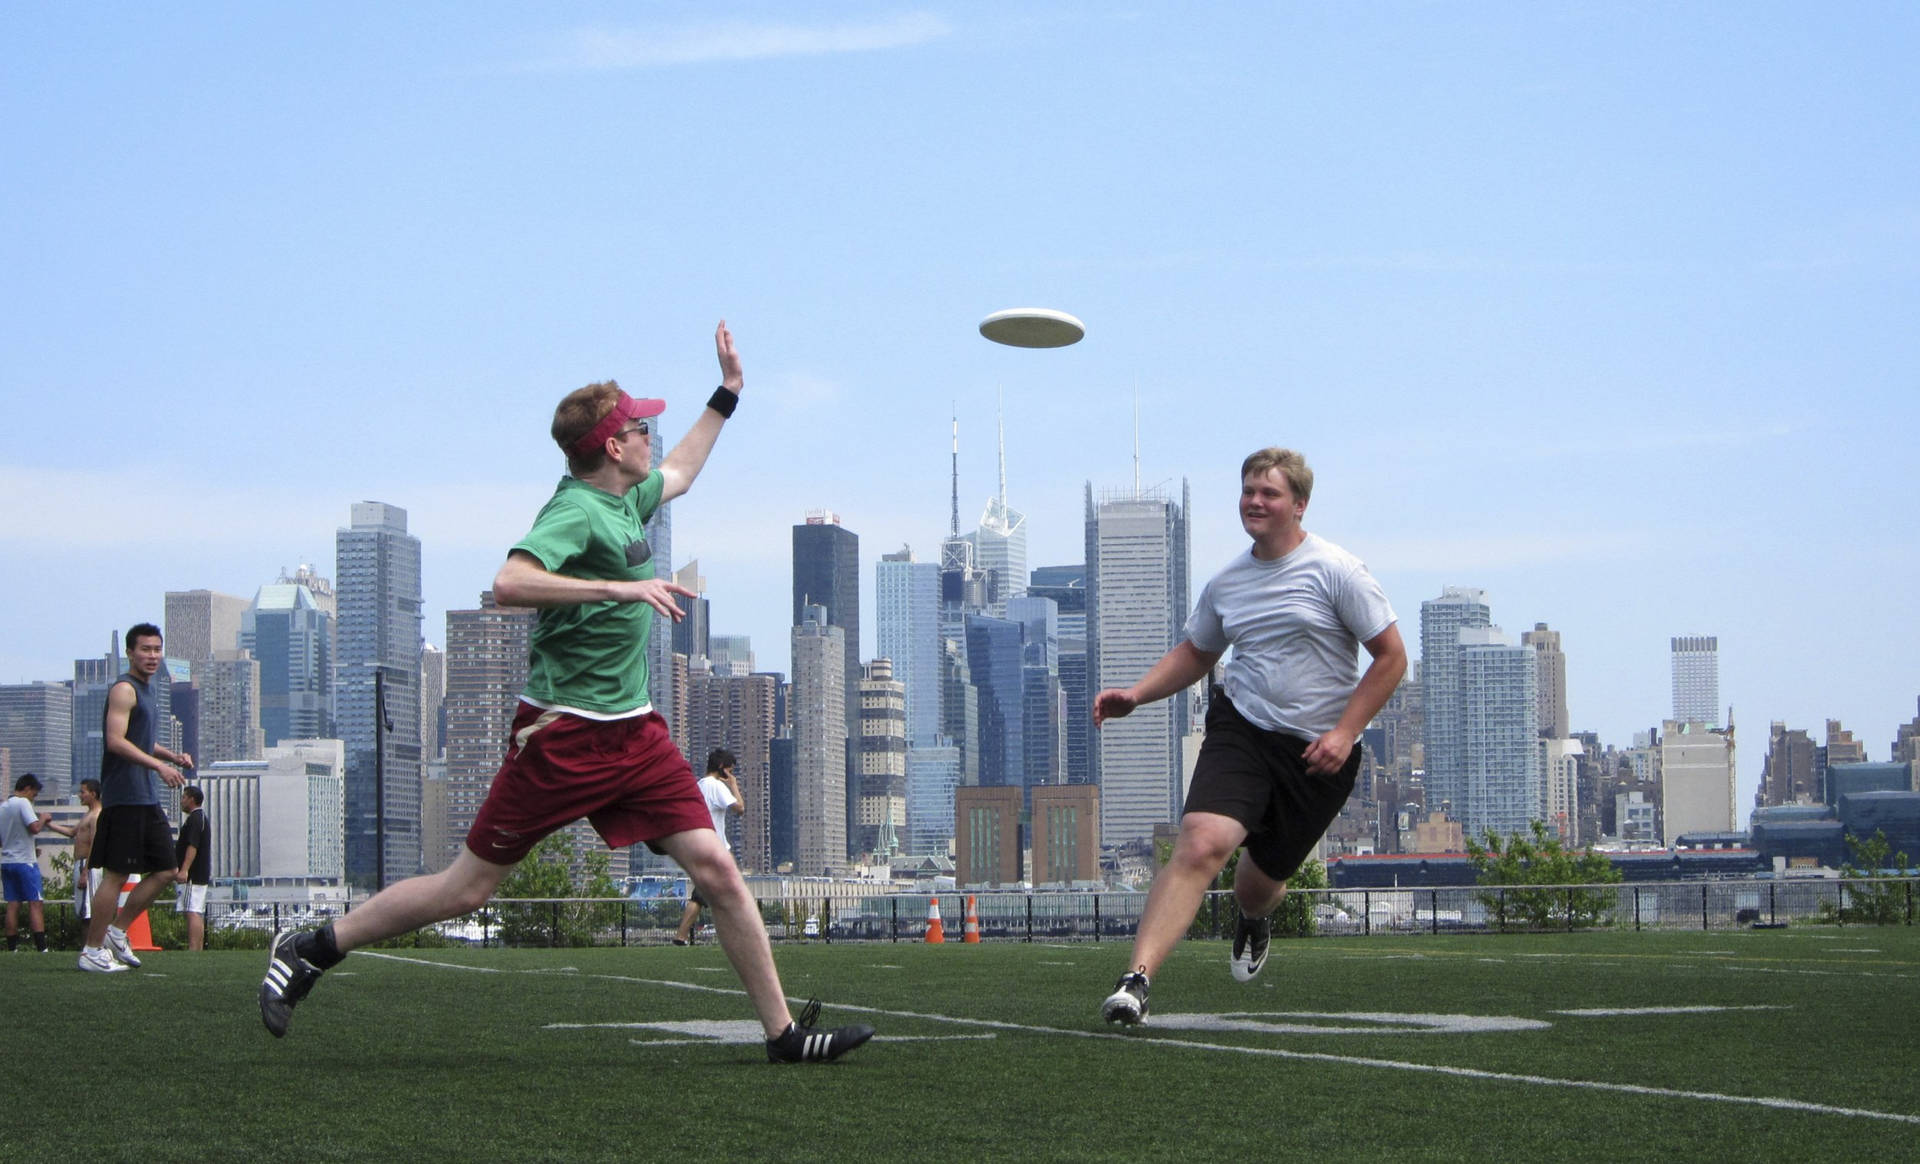 The ultimate frisbee town